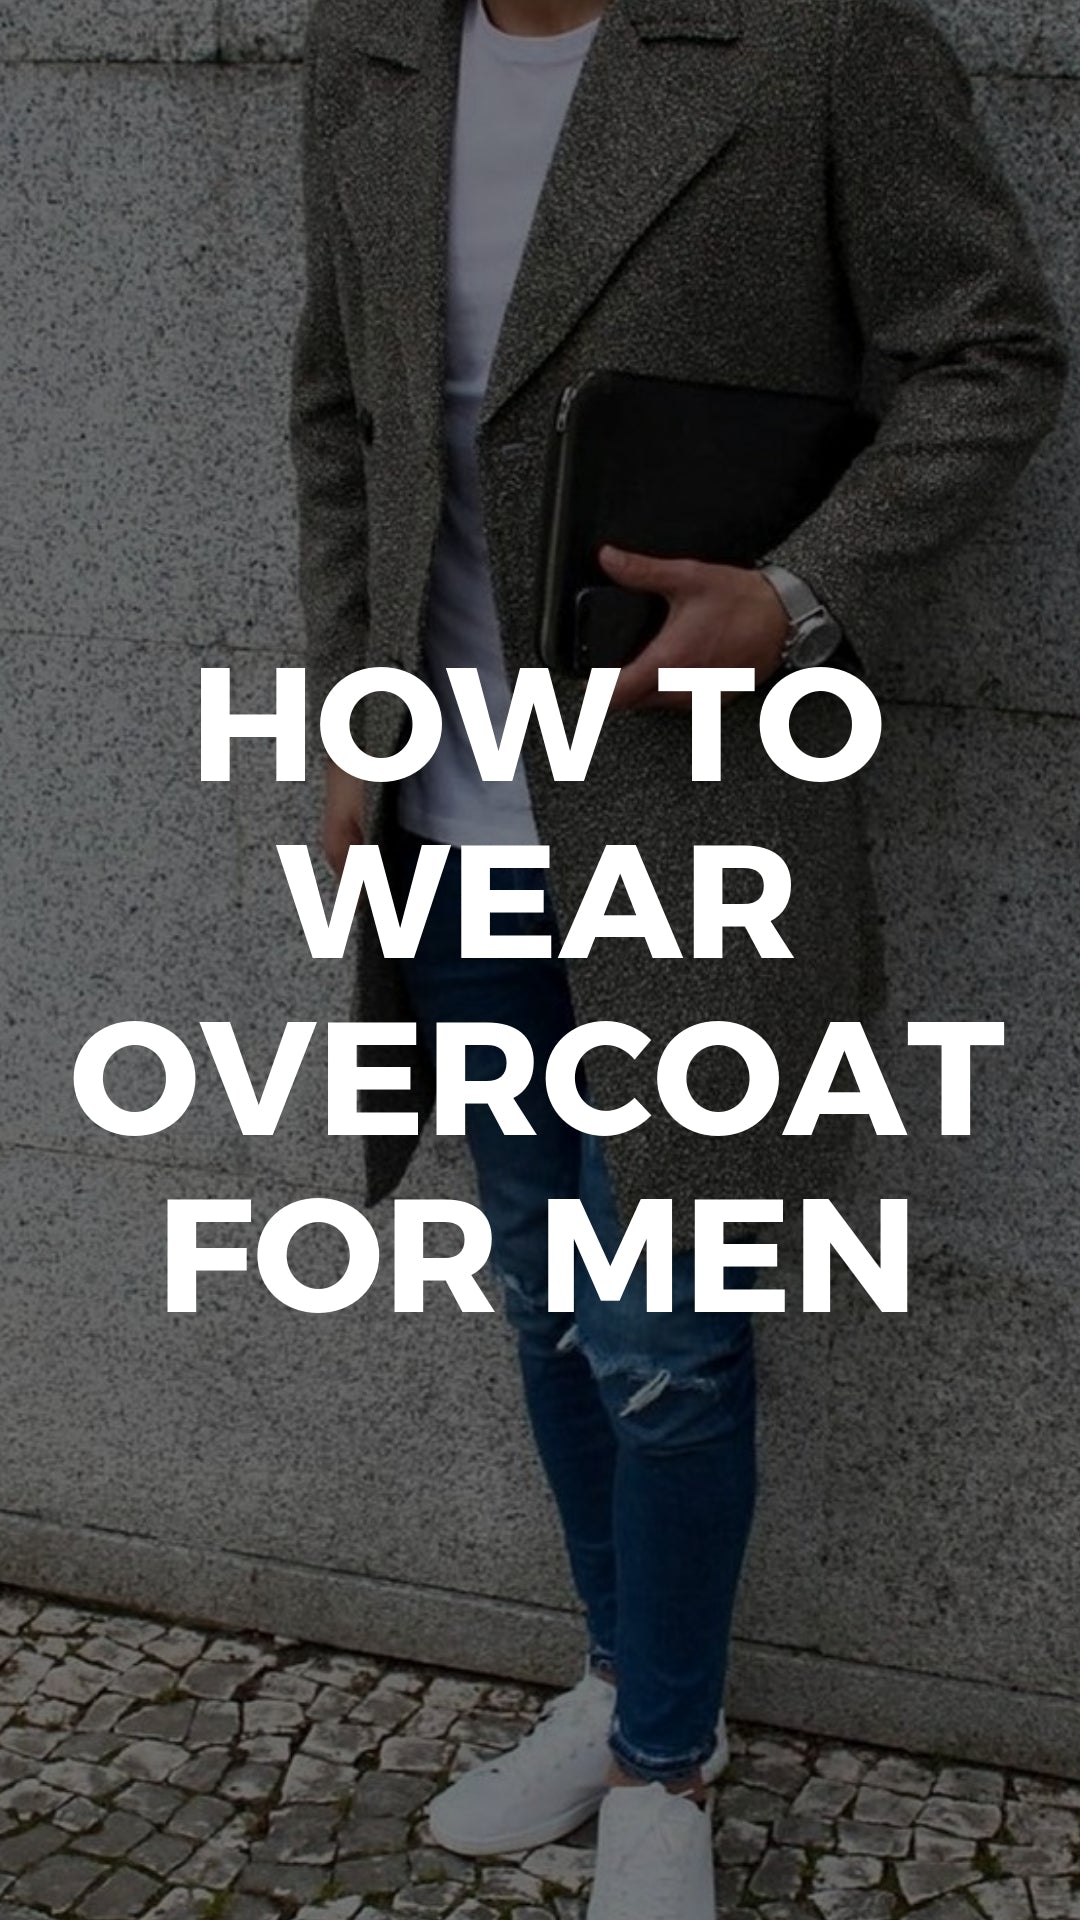 Overcoat outfits for men #mens #fashion #street #style